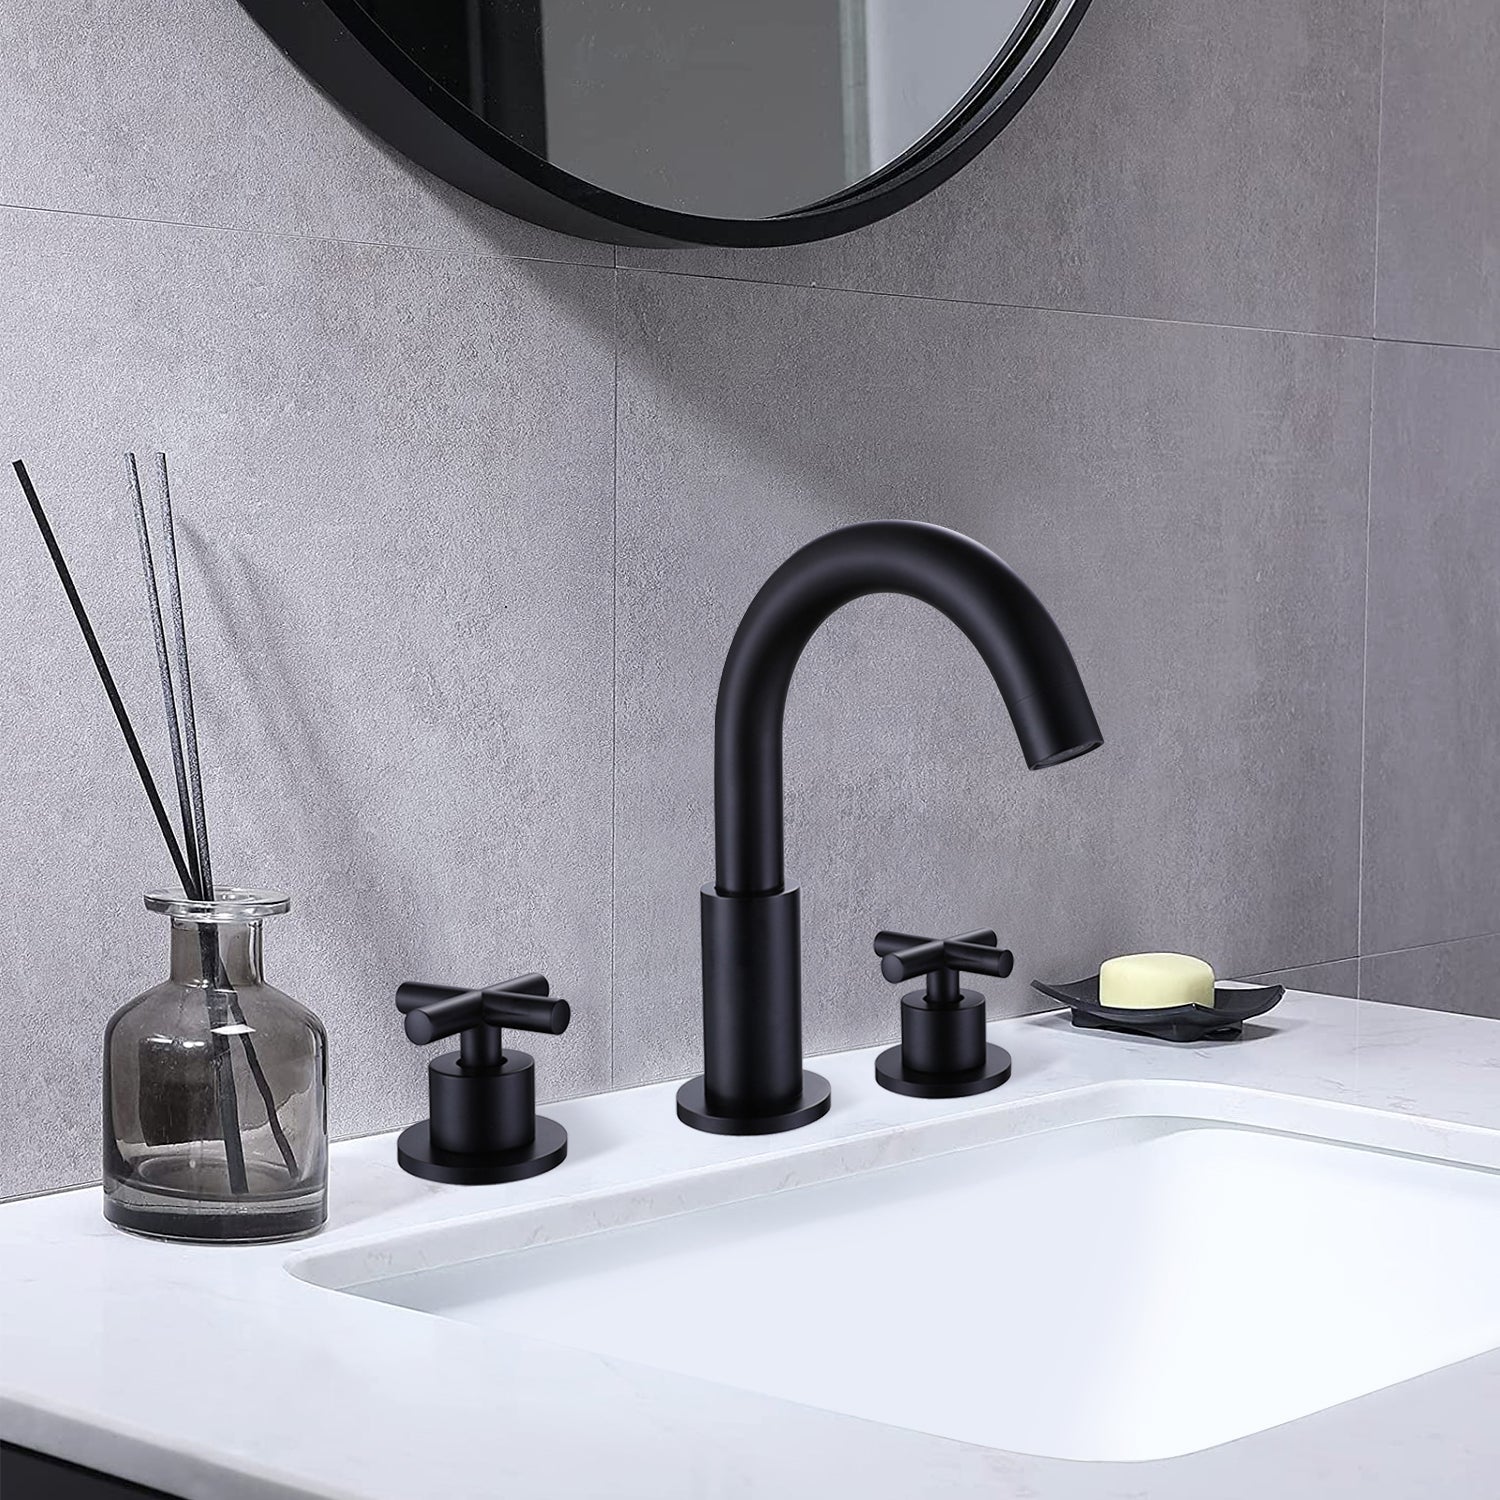 Matte Black Deck Mounted Bathroom Sink Faucet With Rough-in Valve